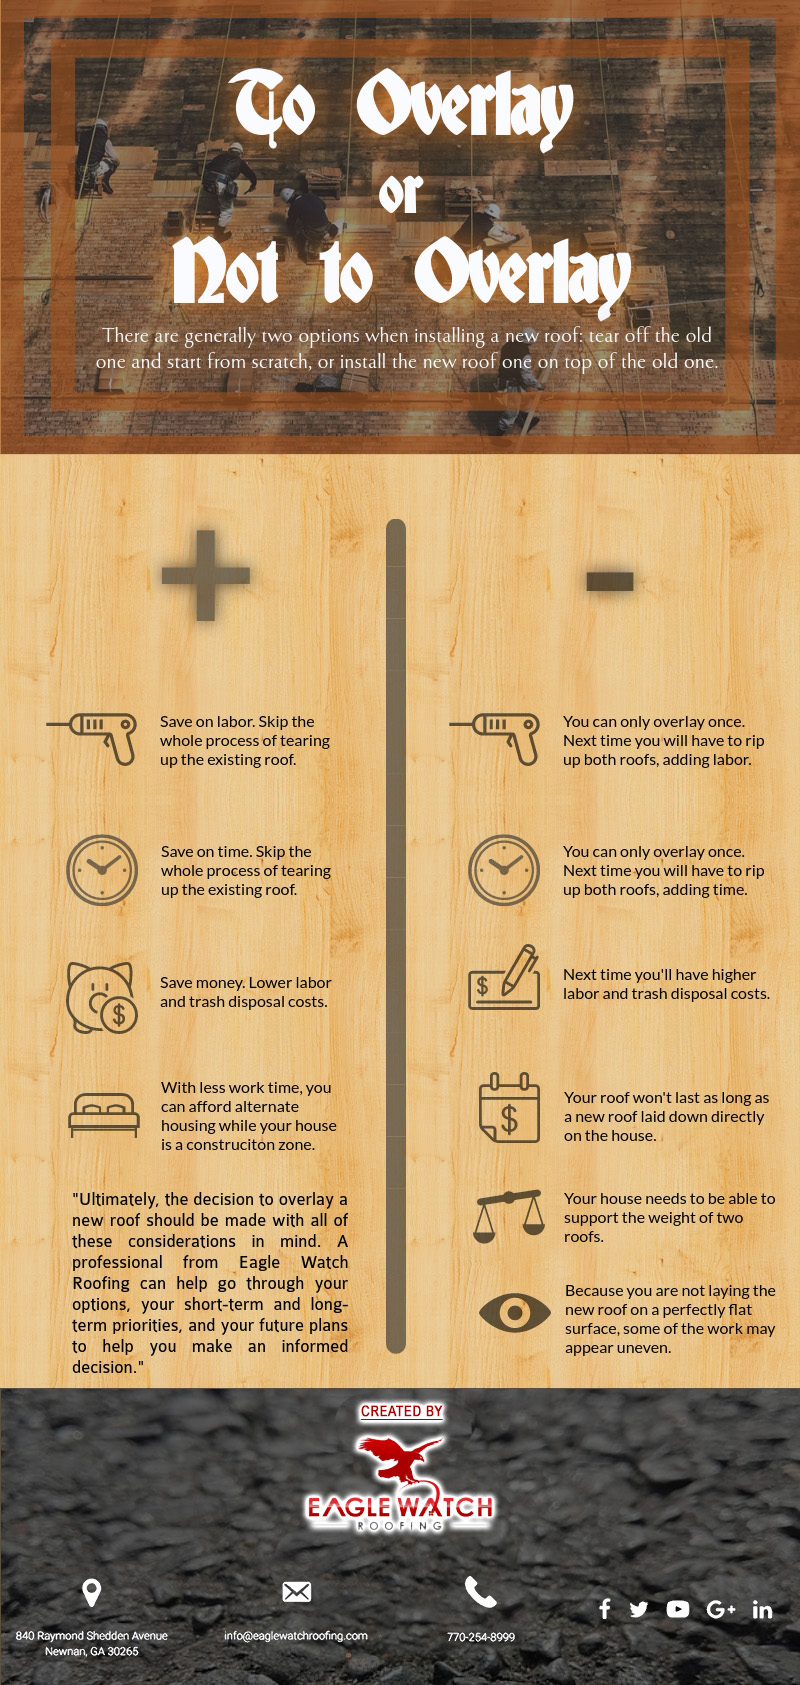 Does It Make Sense to Overlay a New Roof [infographic]